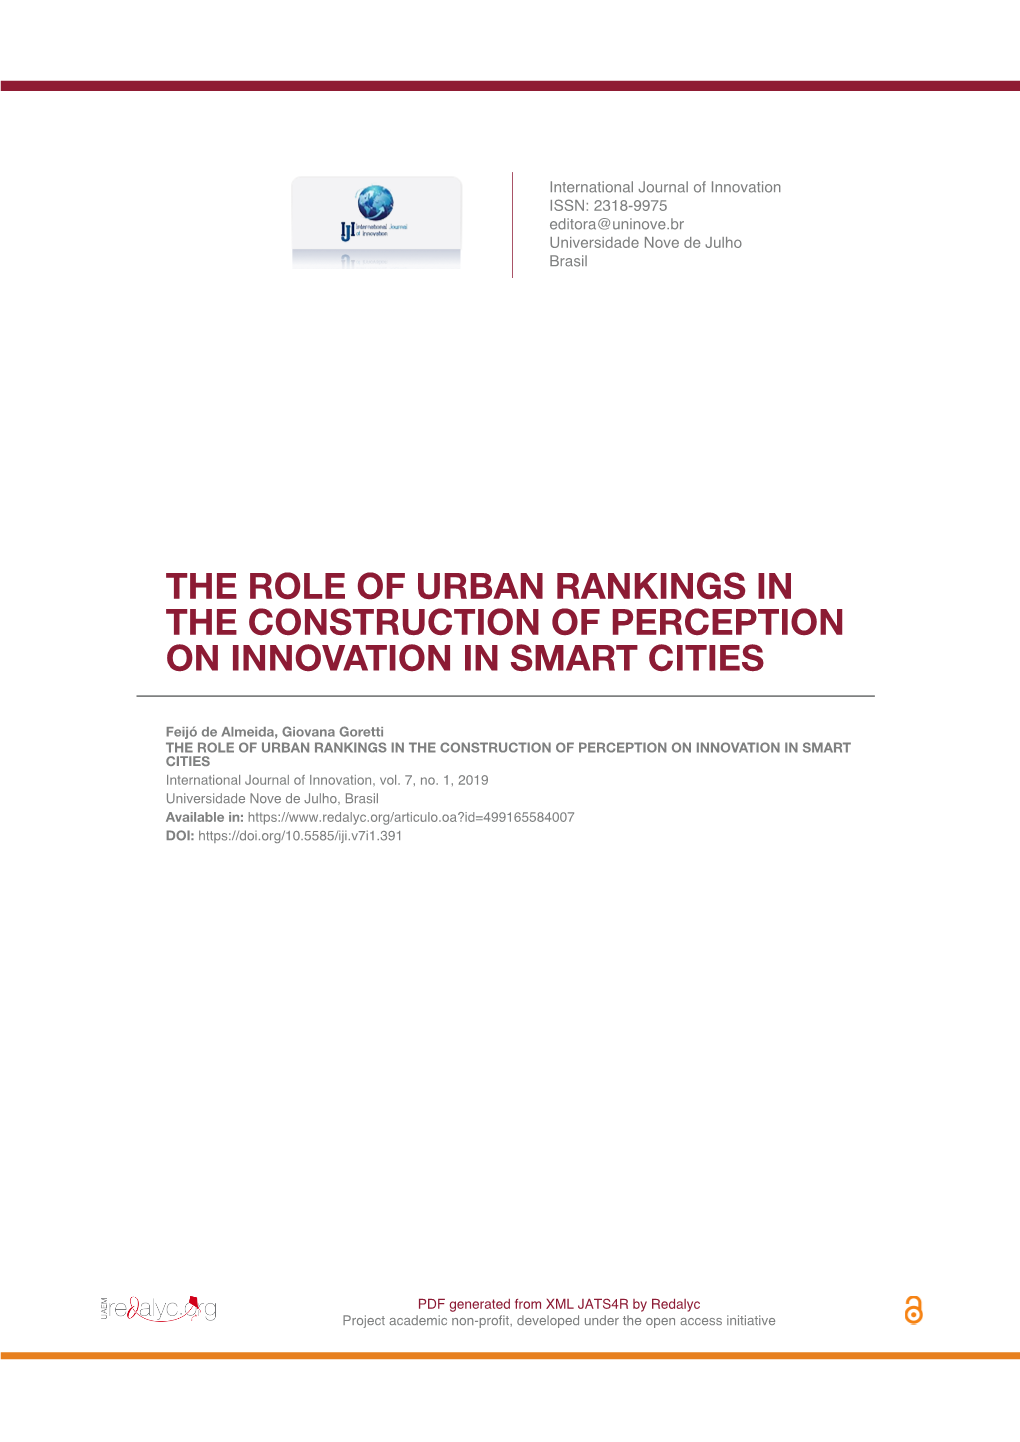 The Role of Urban Rankings in the Construction of Perception on Innovation in Smart Cities